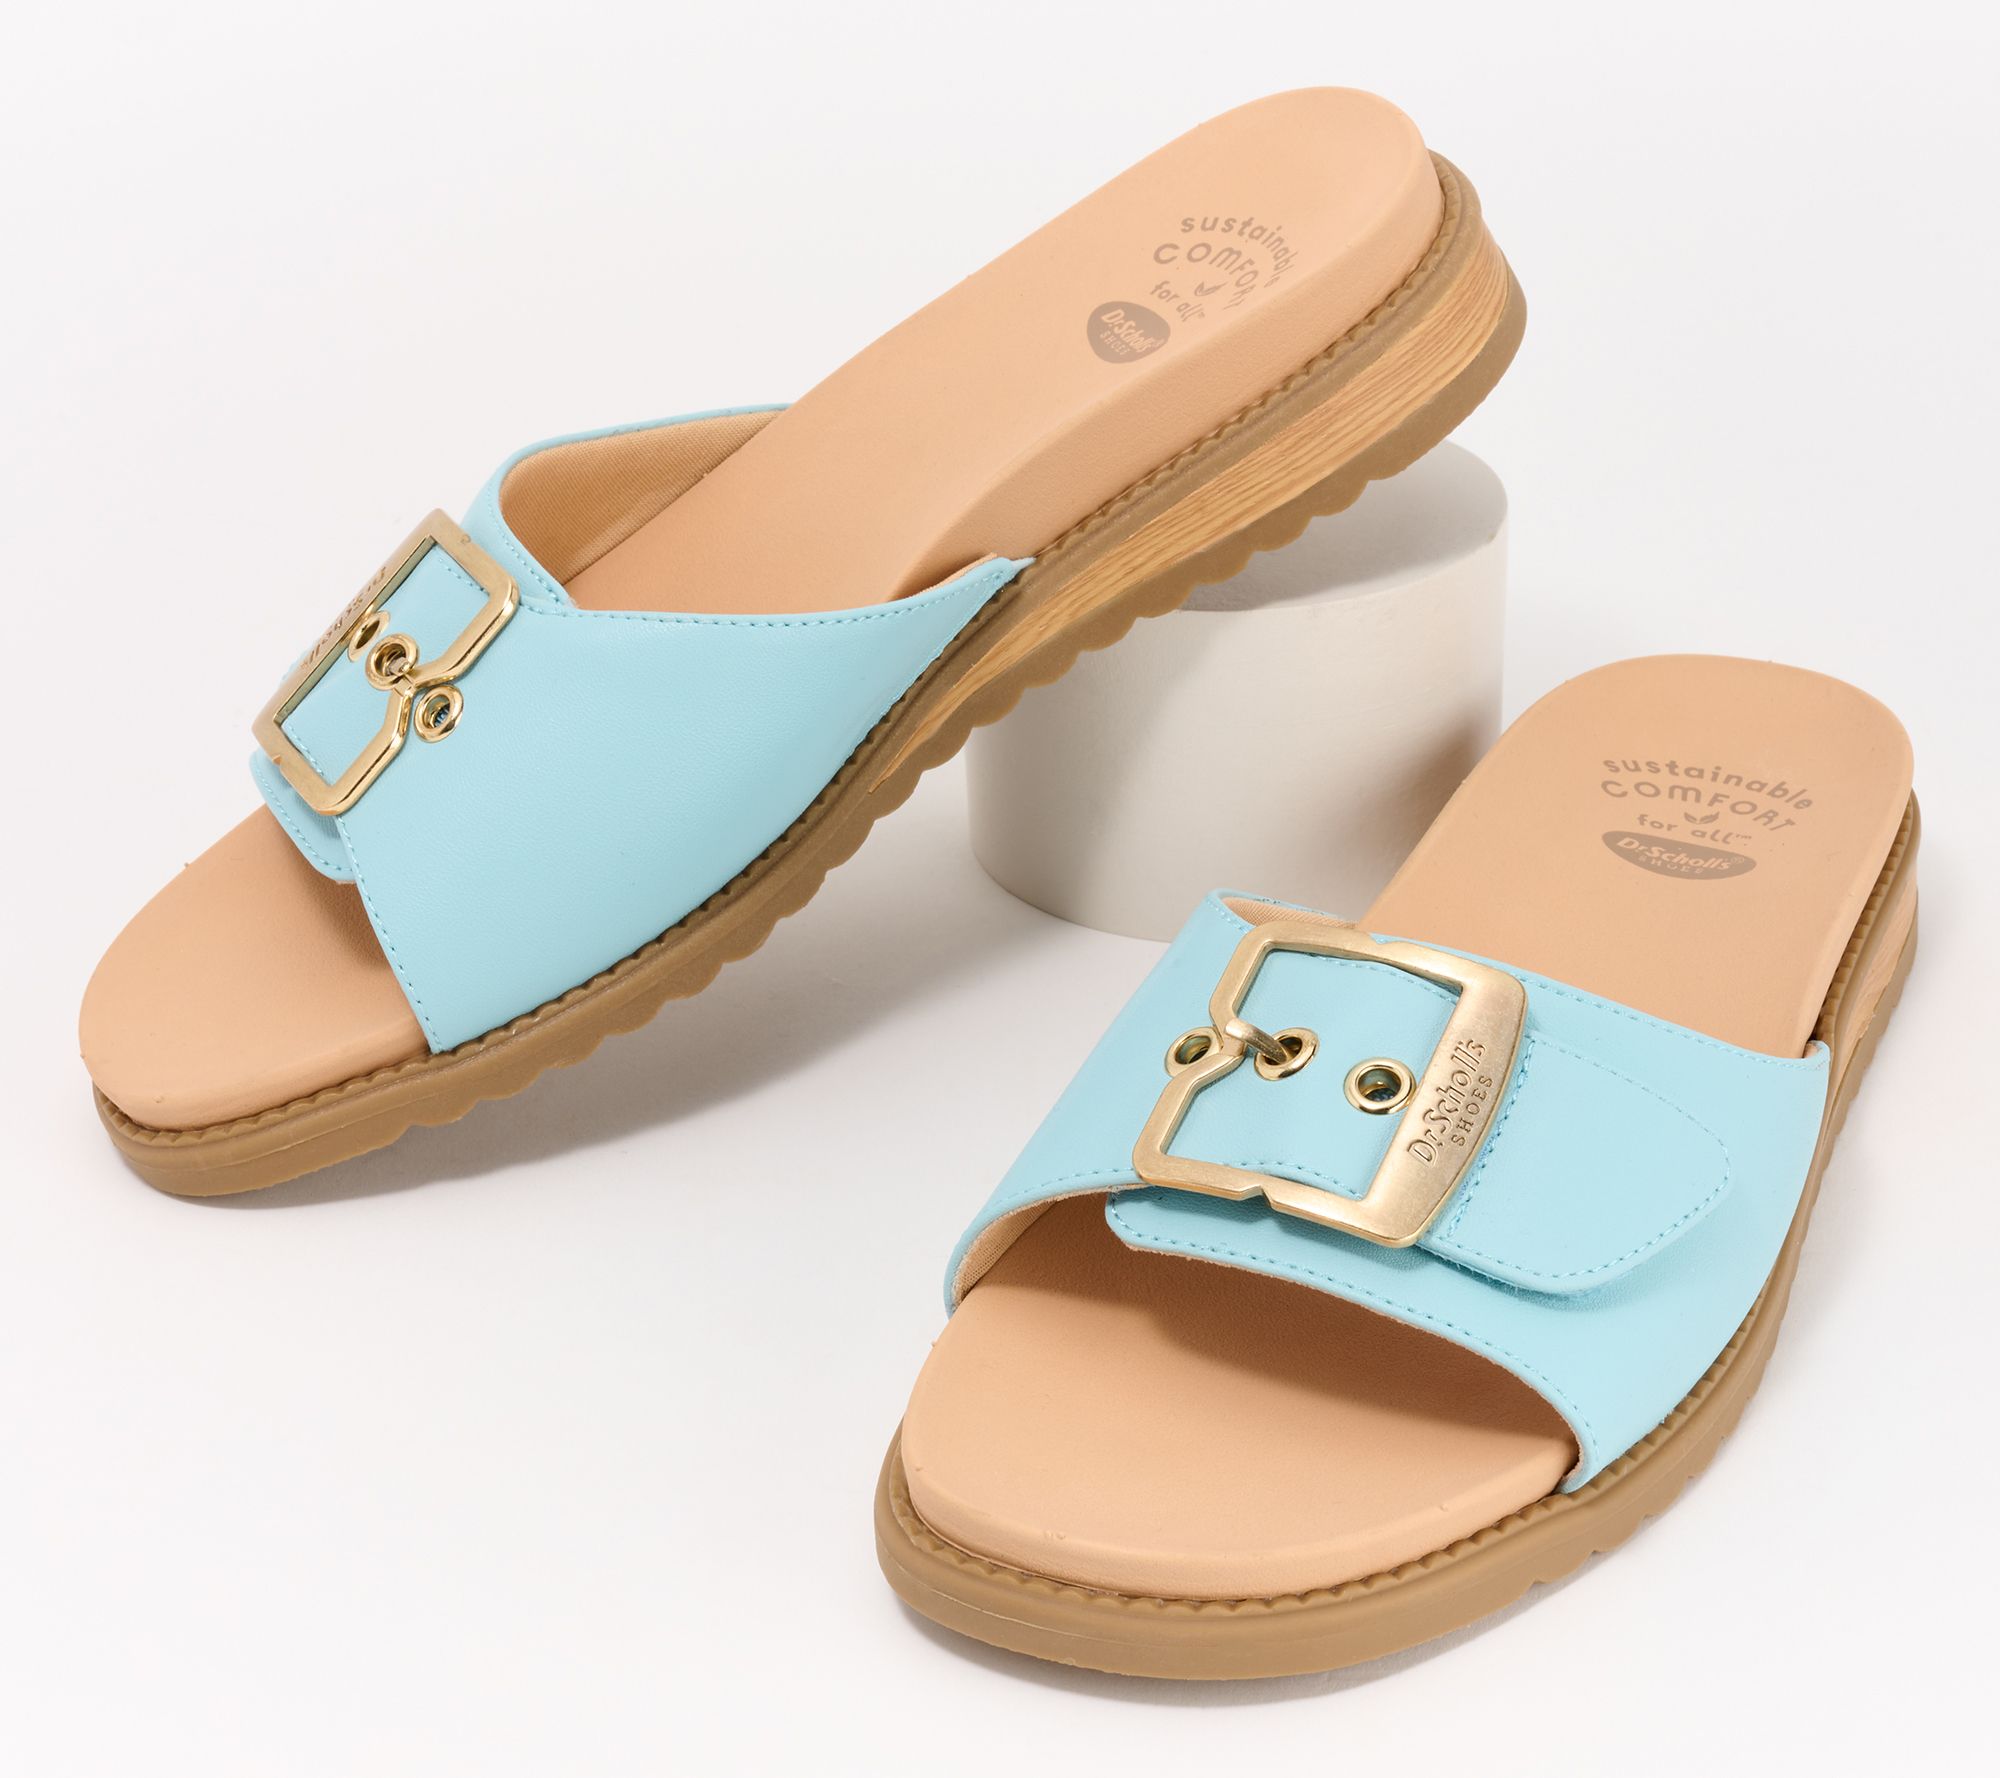 Dr. Scholl's Iconic Buckle Sandals - Get it Movin 